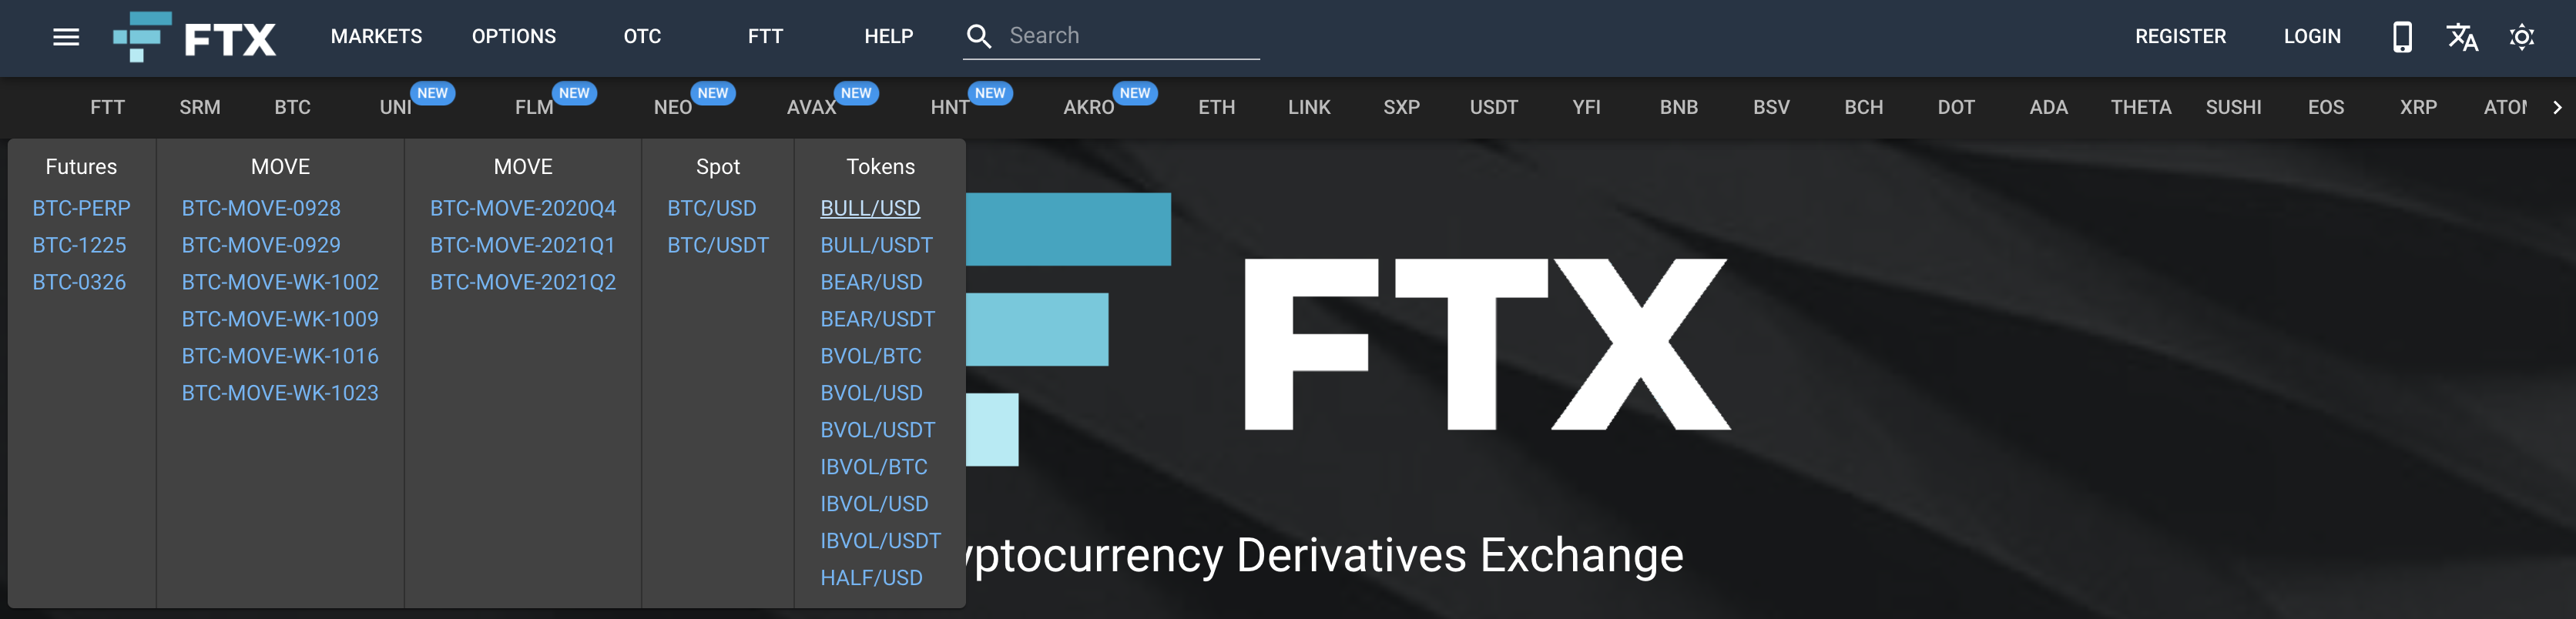 An Introduction To FTX Crypto Leveraged Tokens - The ...